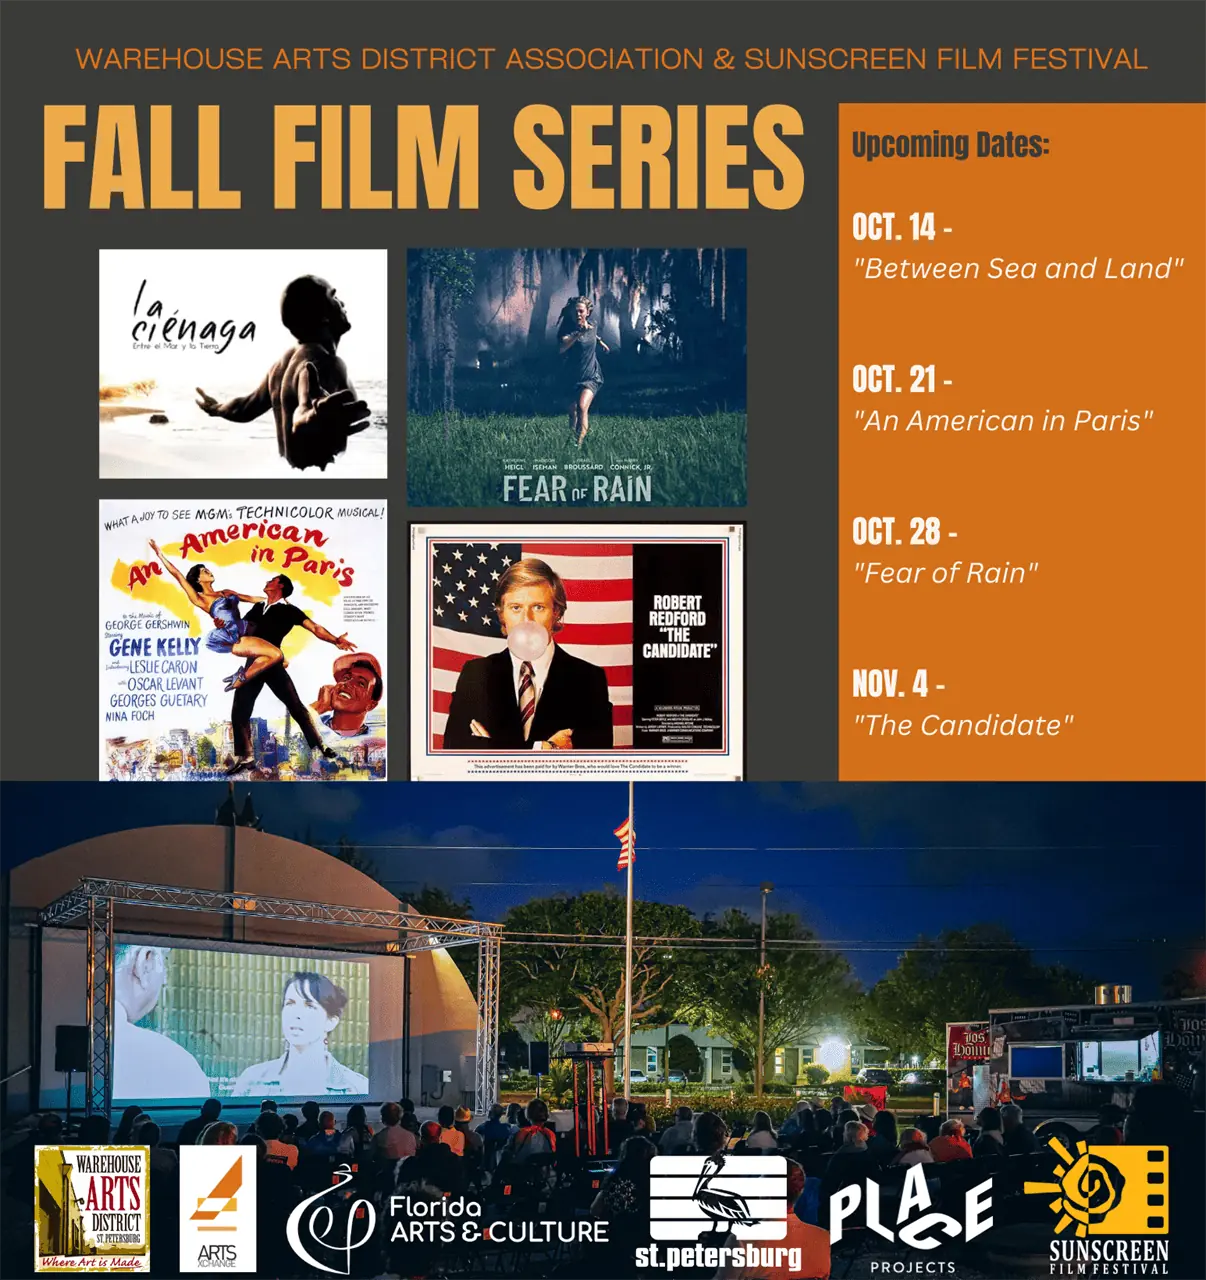 Fall Film Series by WADA and Sunscreen Film Festival